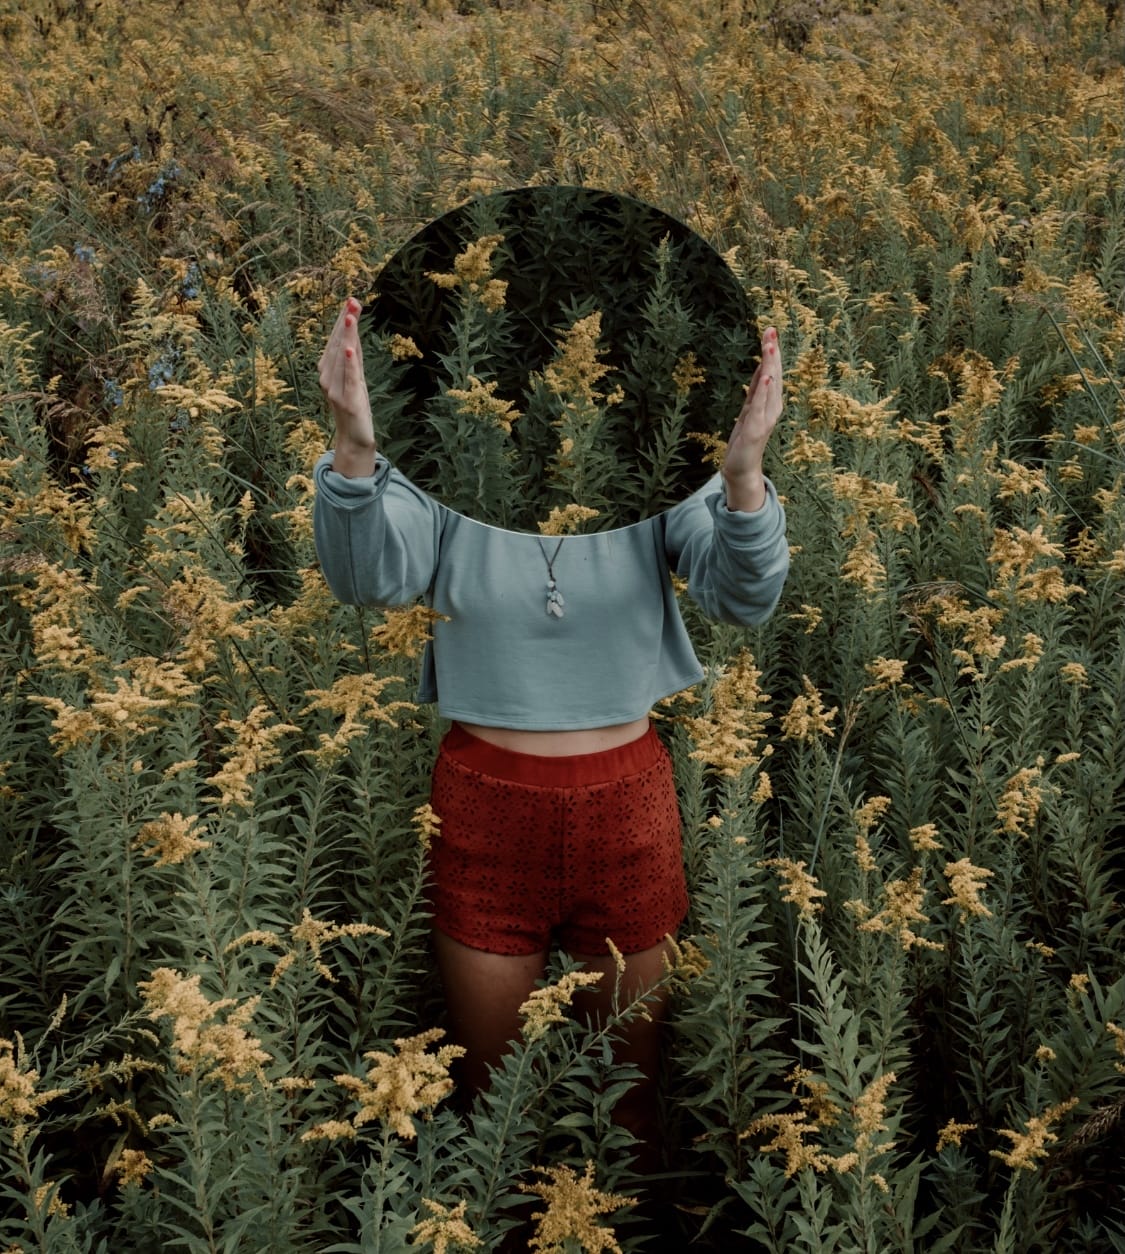 Woman in blue top and red shorts stands in field of yellow flowers with a mirror in front of her face, as if she is searching for her authentic identity